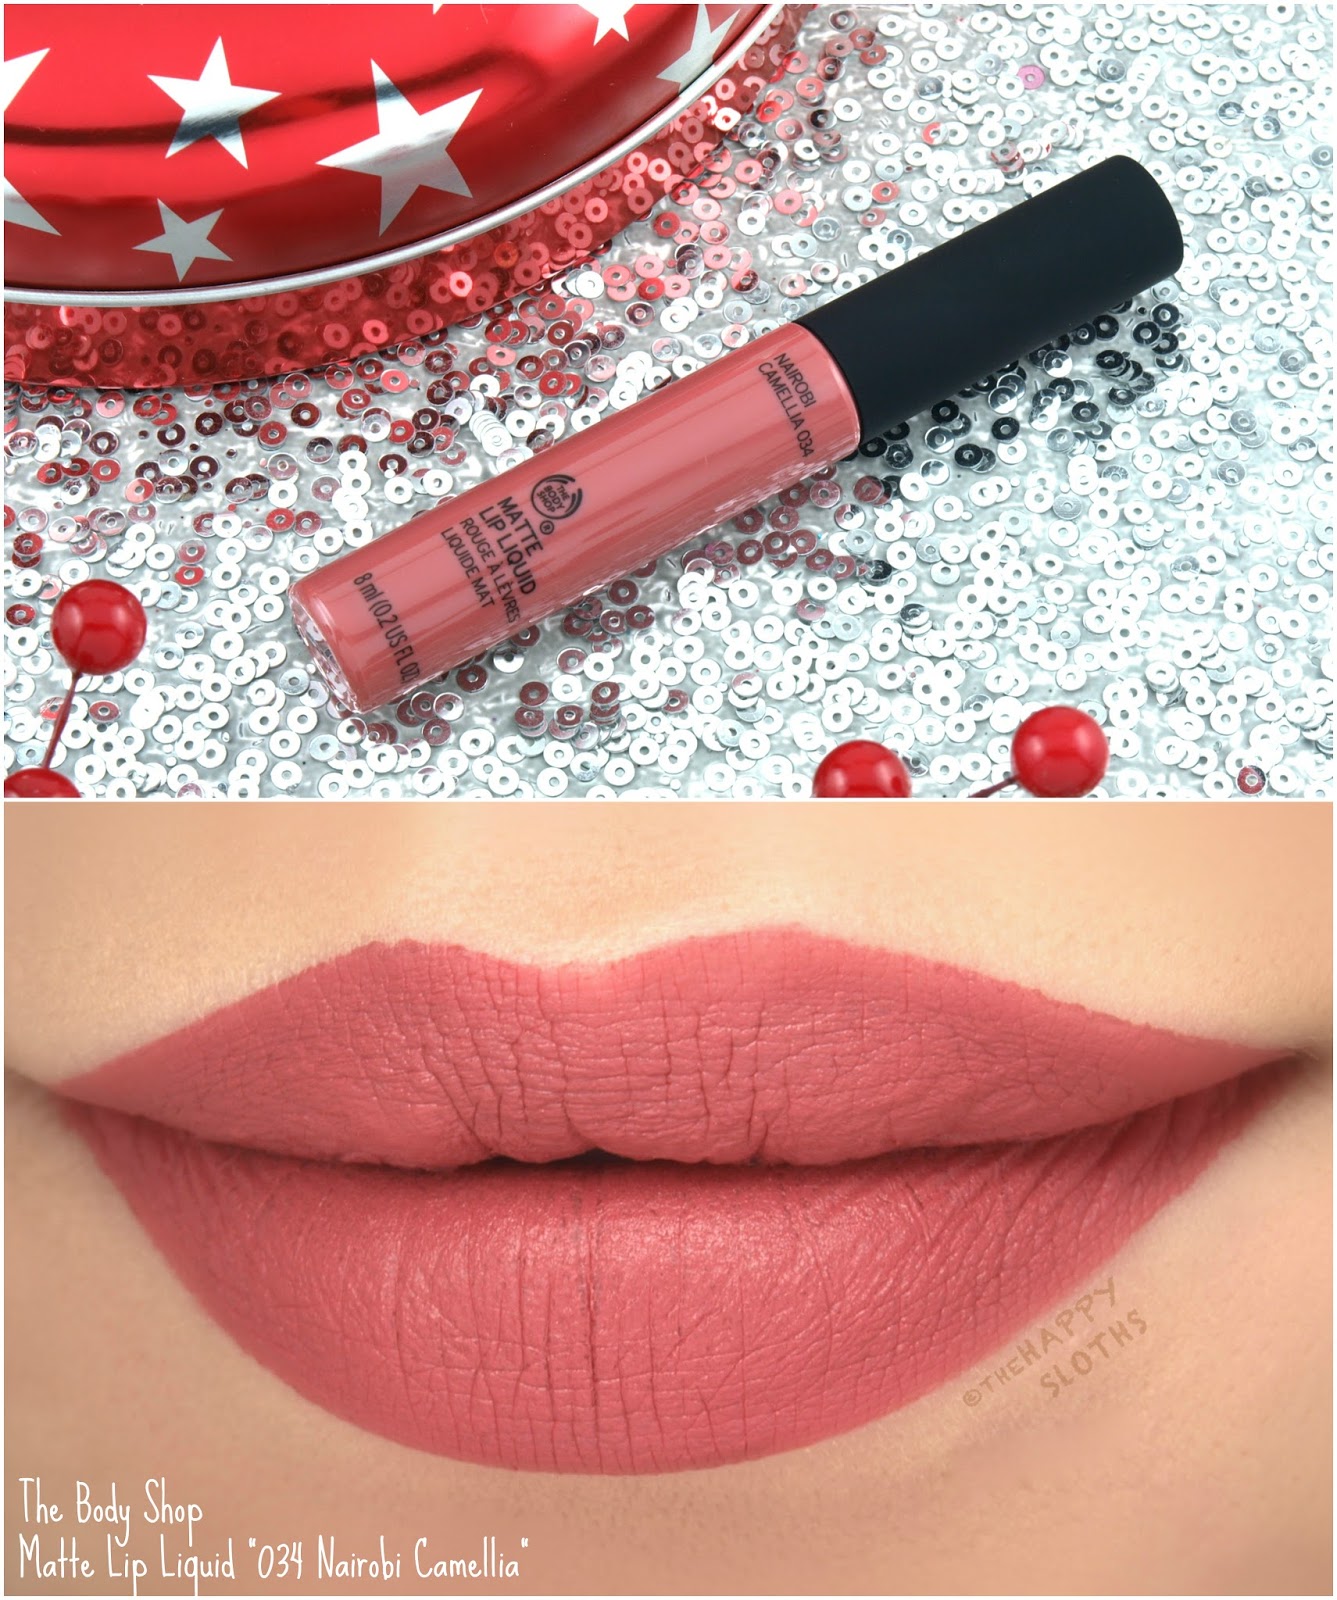 The Body Shop Matte Lip Liquid in "034 Nairobi Camellia": Review and Swatches